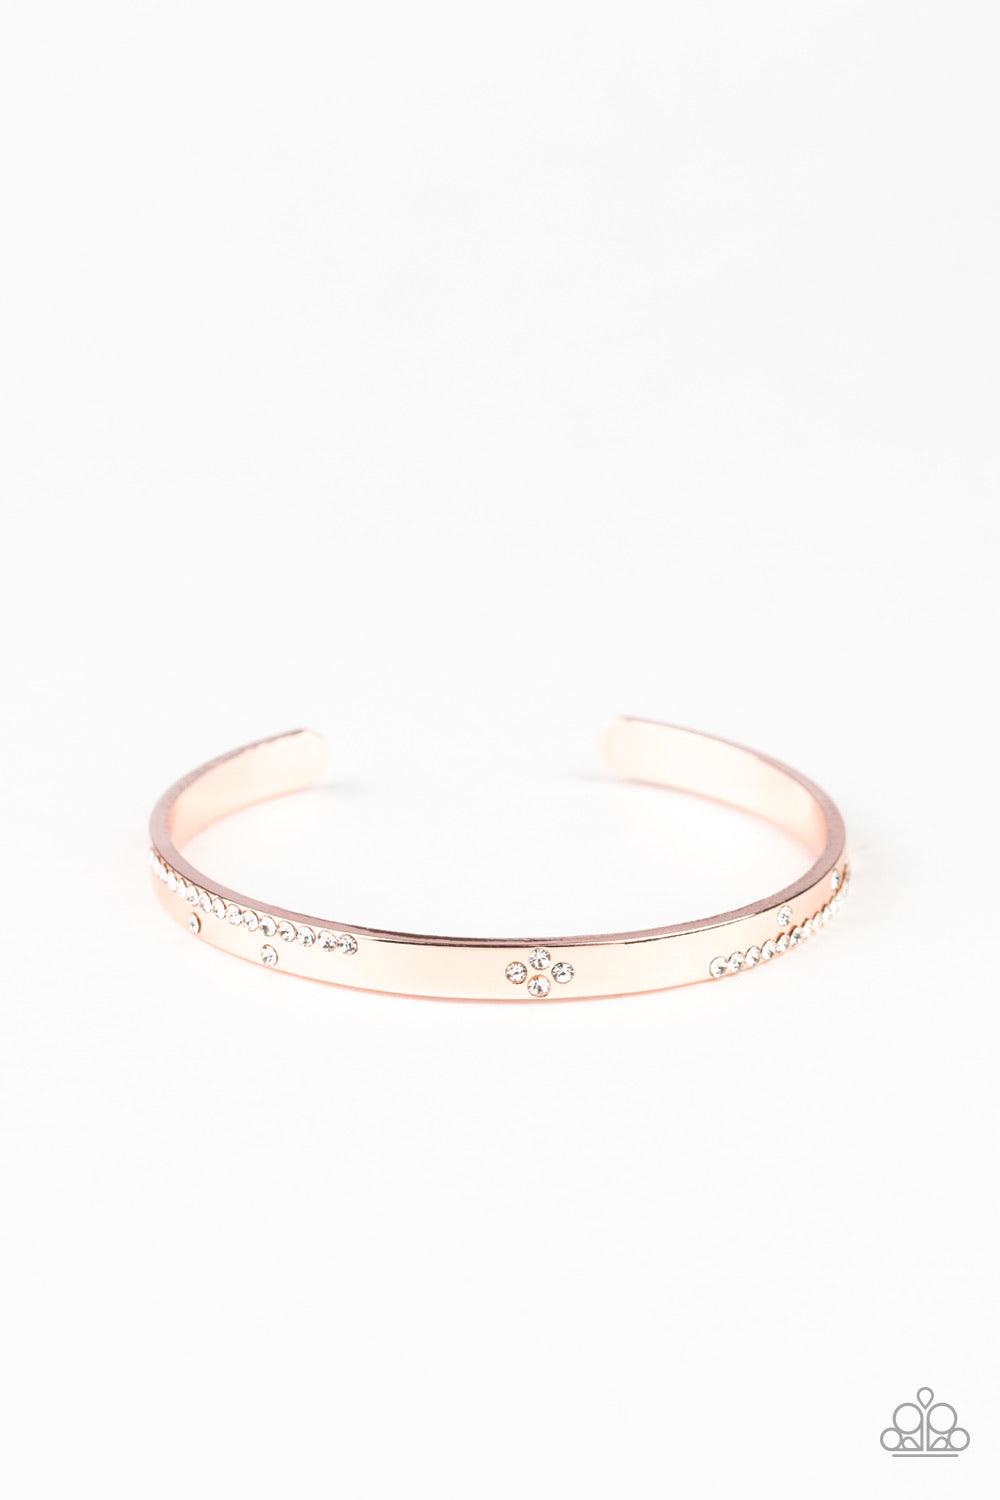 Paparazzi Accessories Dainty Dazzle - Rose Gold Glassy white rhinestones are sprinkled across the front of a dainty rose gold cuff for a refined look. Jewelry